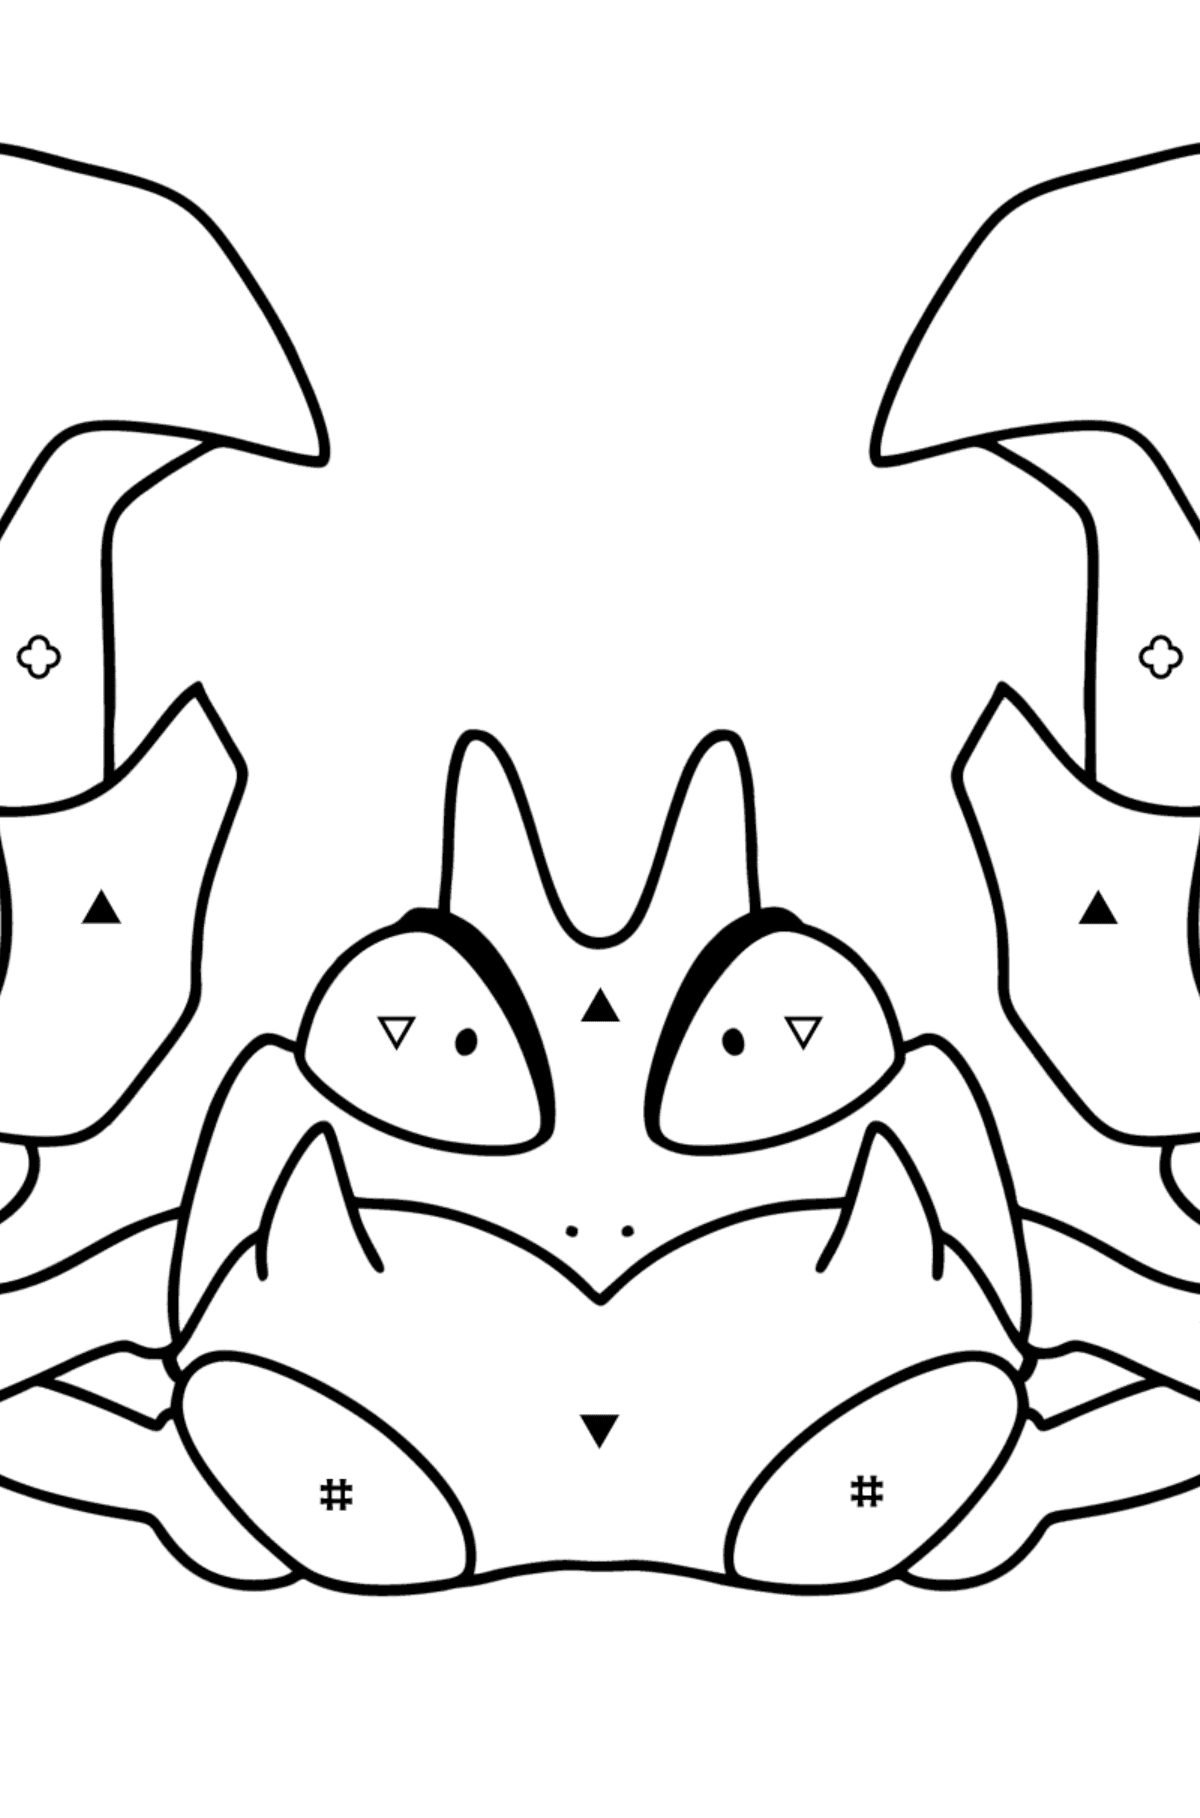 Pokemon Go Krabby coloring page - Coloring by Symbols and Geometric Shapes for Kids